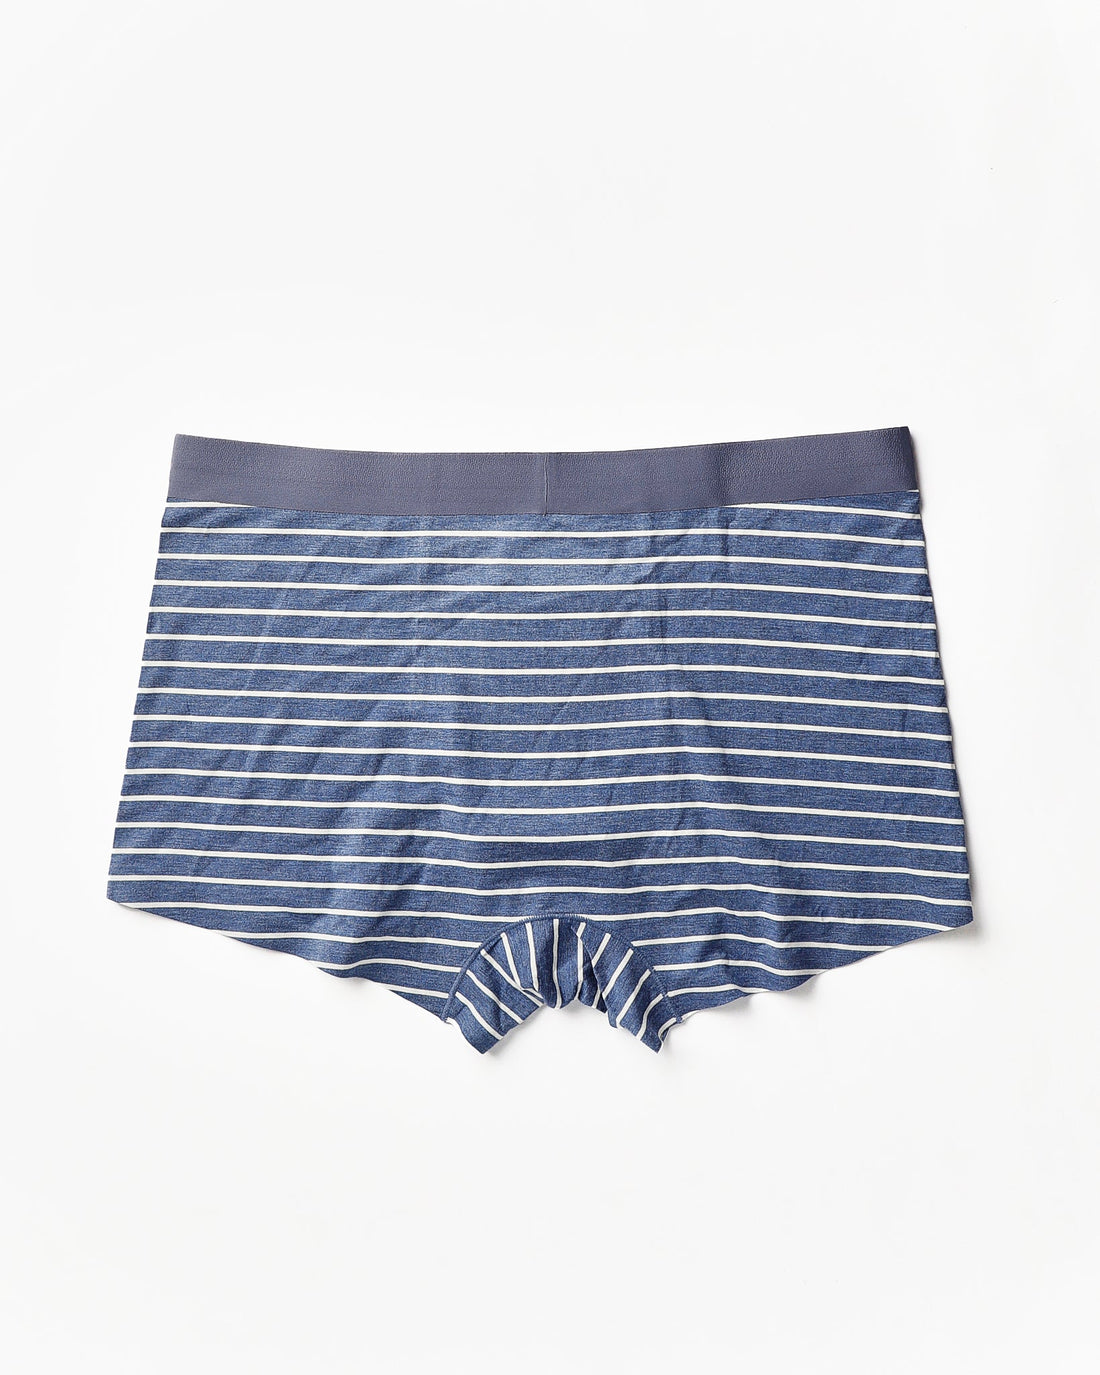 MOI OUTFIT-Striped Over Printed Men Underwear 6.90